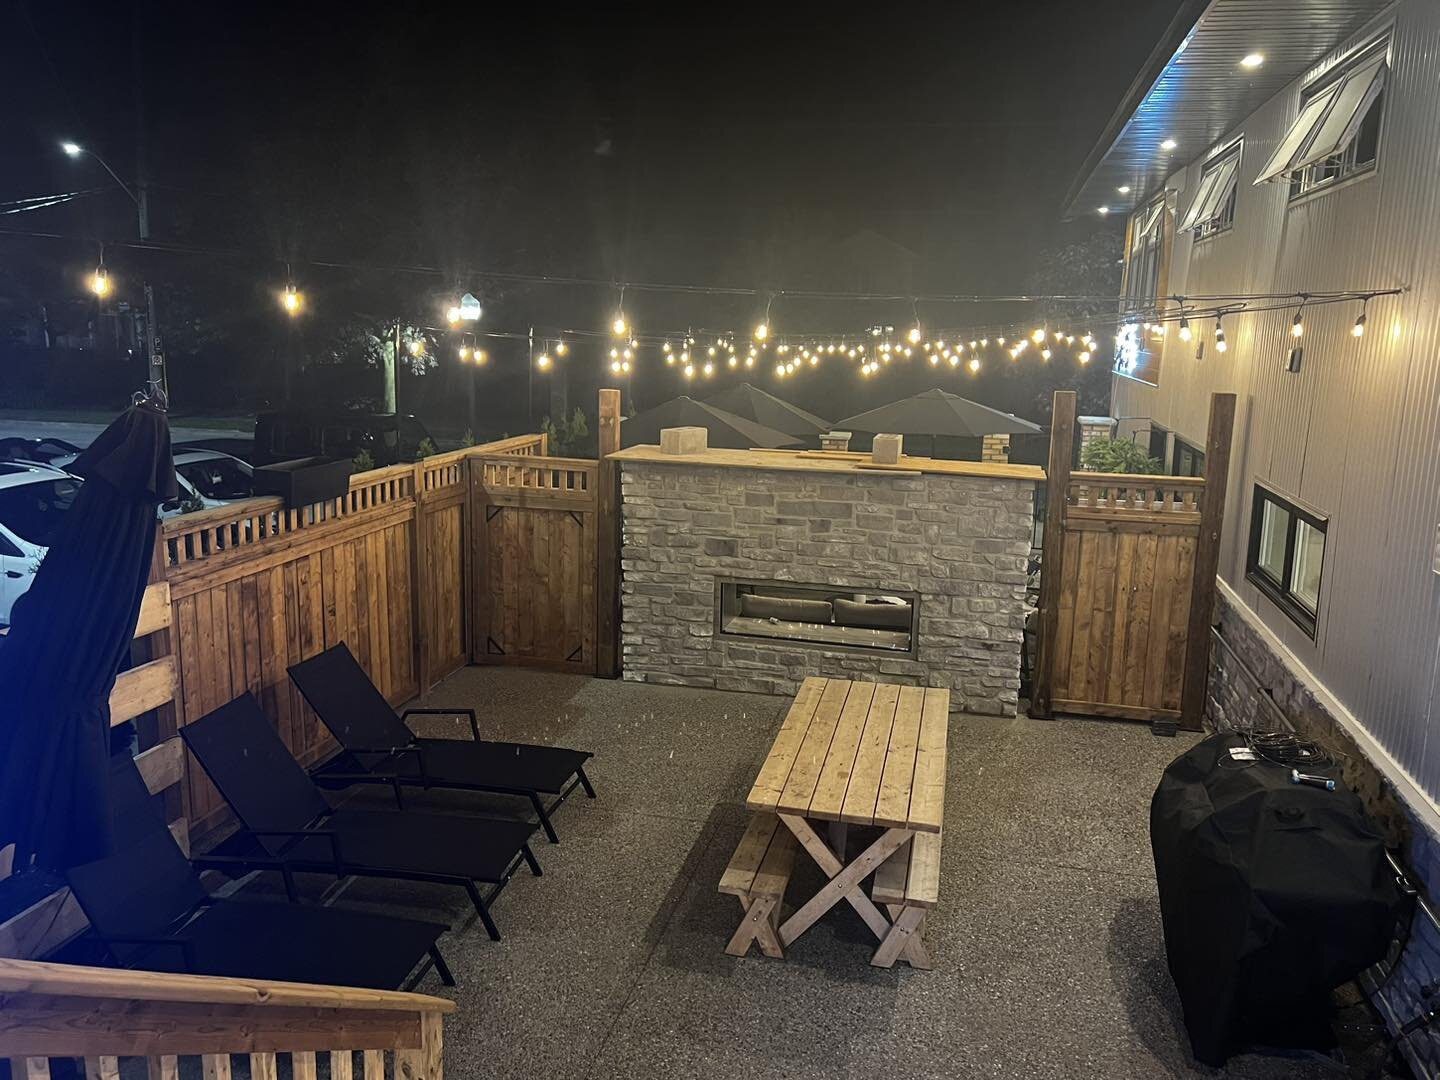 The new patio and amenity space for the hotel is almost complete in time for summer!  Muskoka chairs, Sun loungers, gas bbq, picnic table and a 2 sided gas fireplace will make this an amazing space for our guests to relax!

Visit hotelphilco.com for 